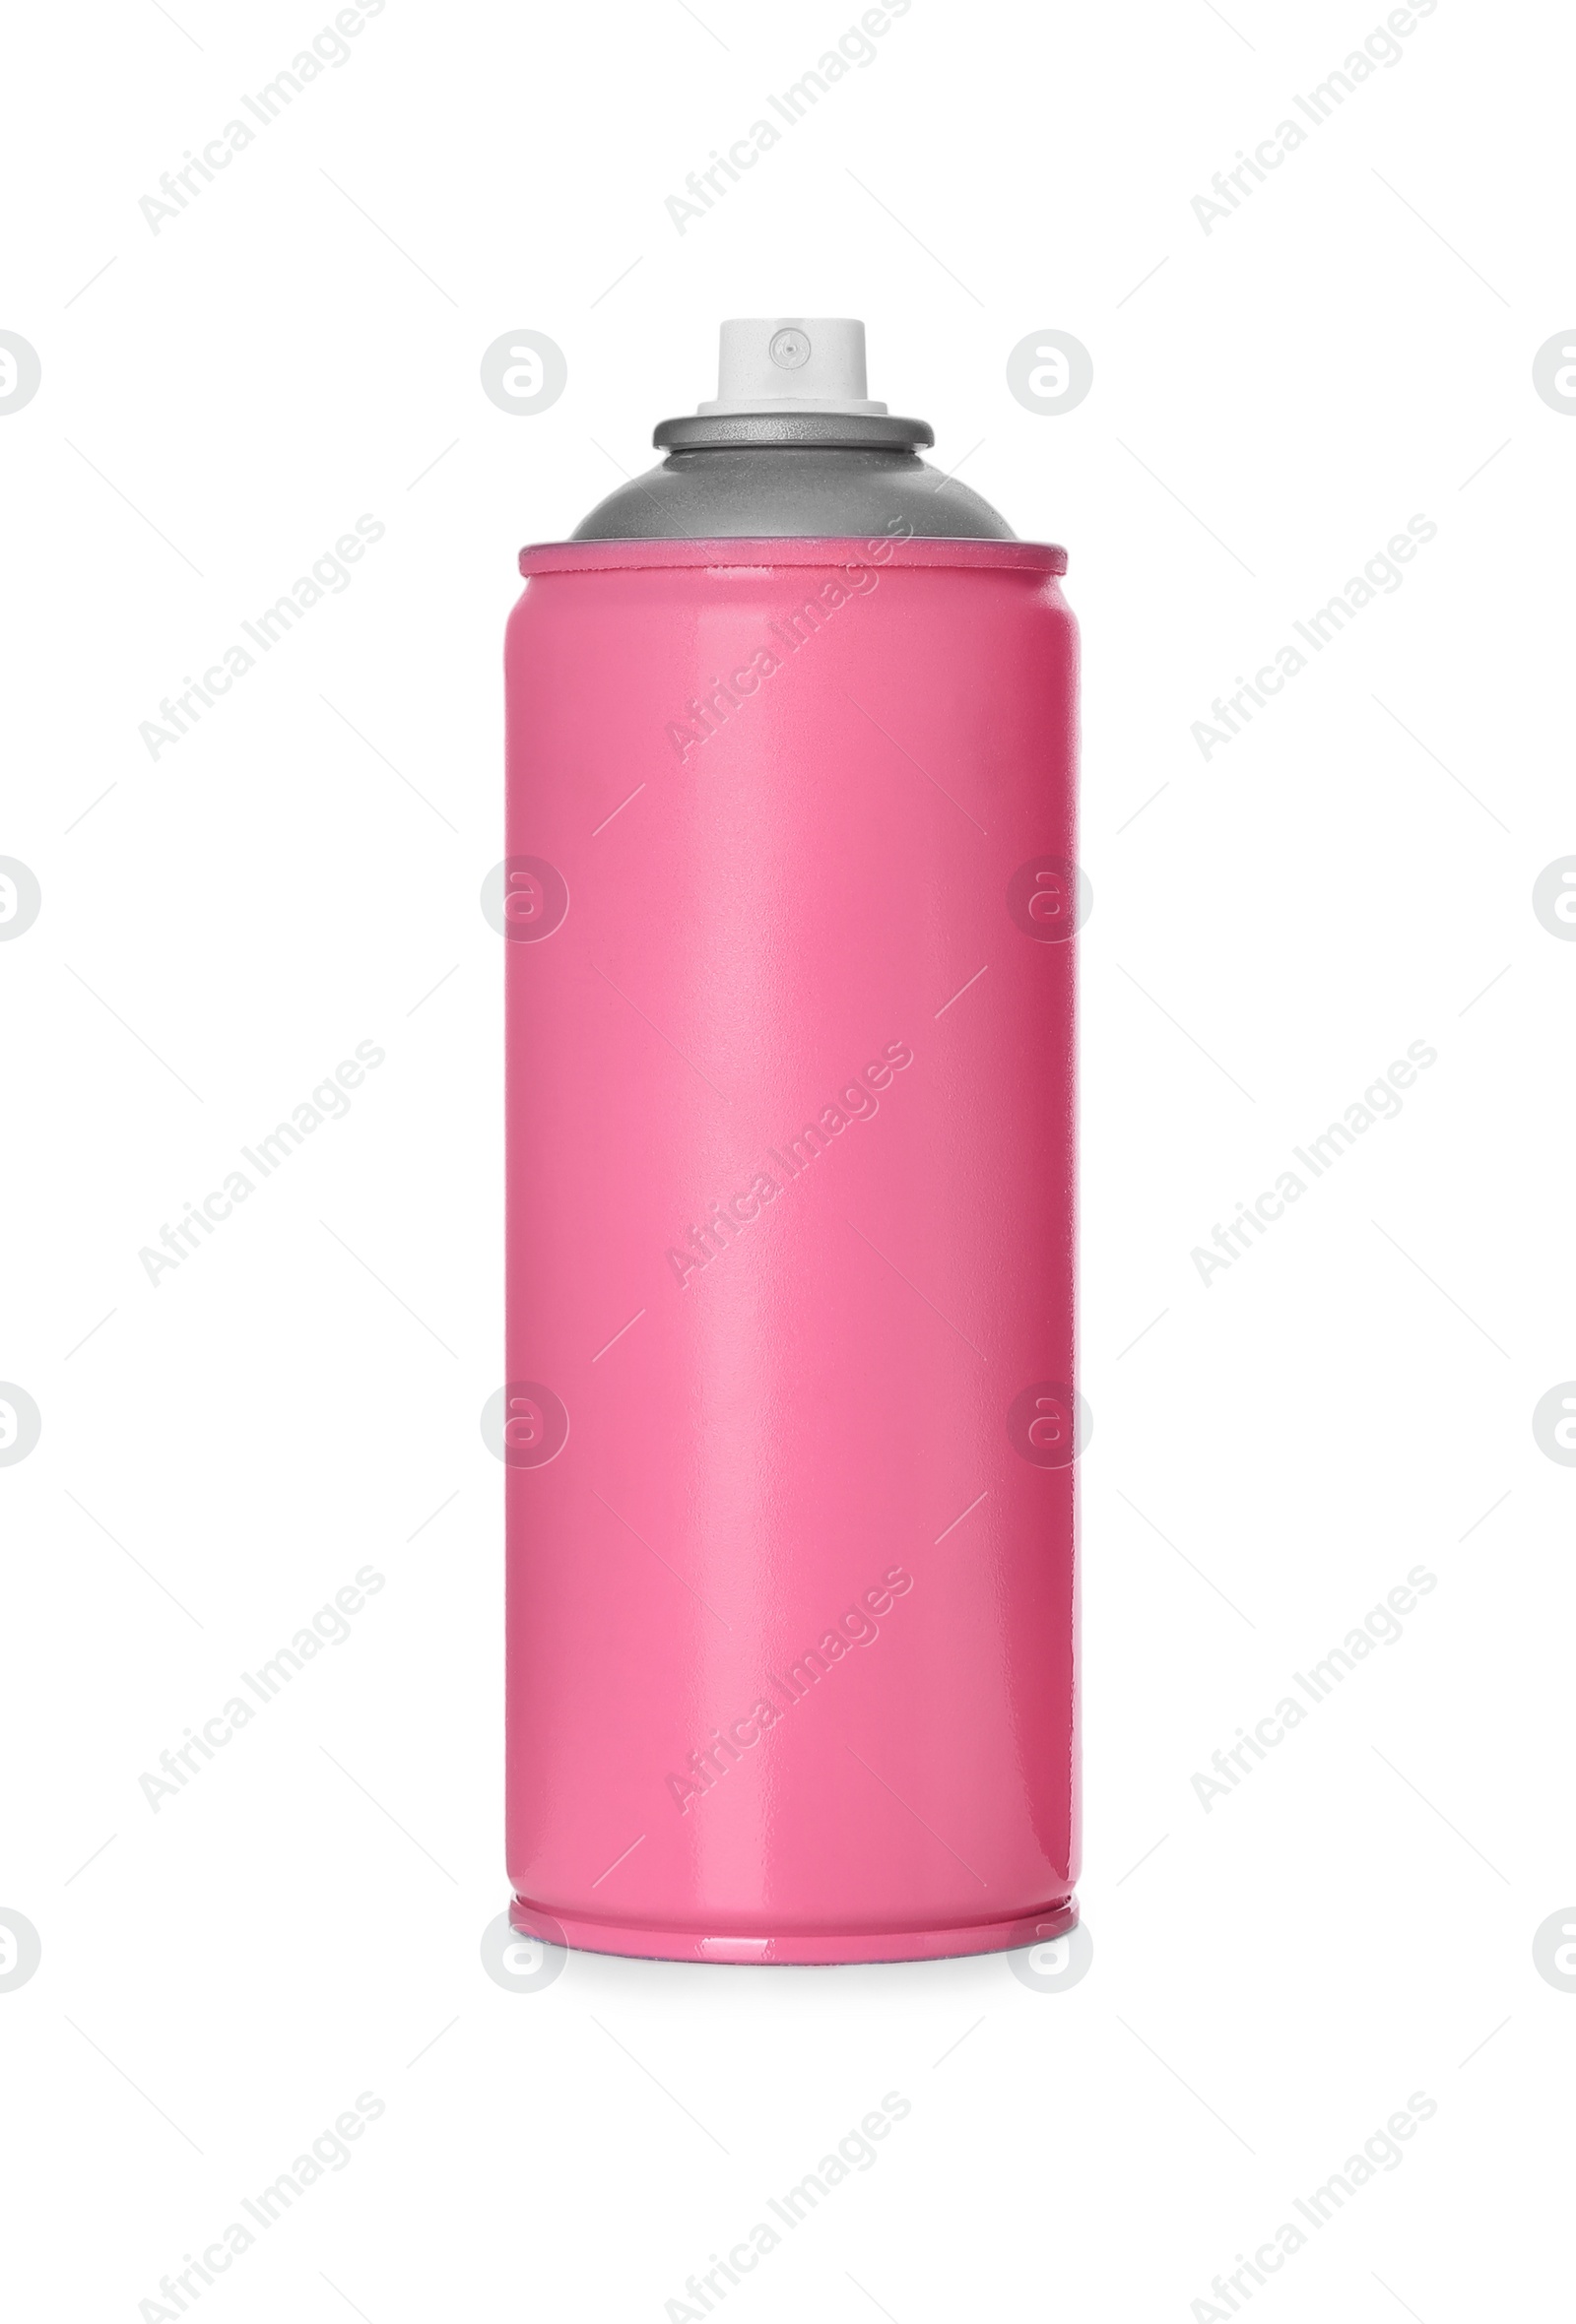 Photo of Can of pink spray paint isolated on white. Graffiti supply